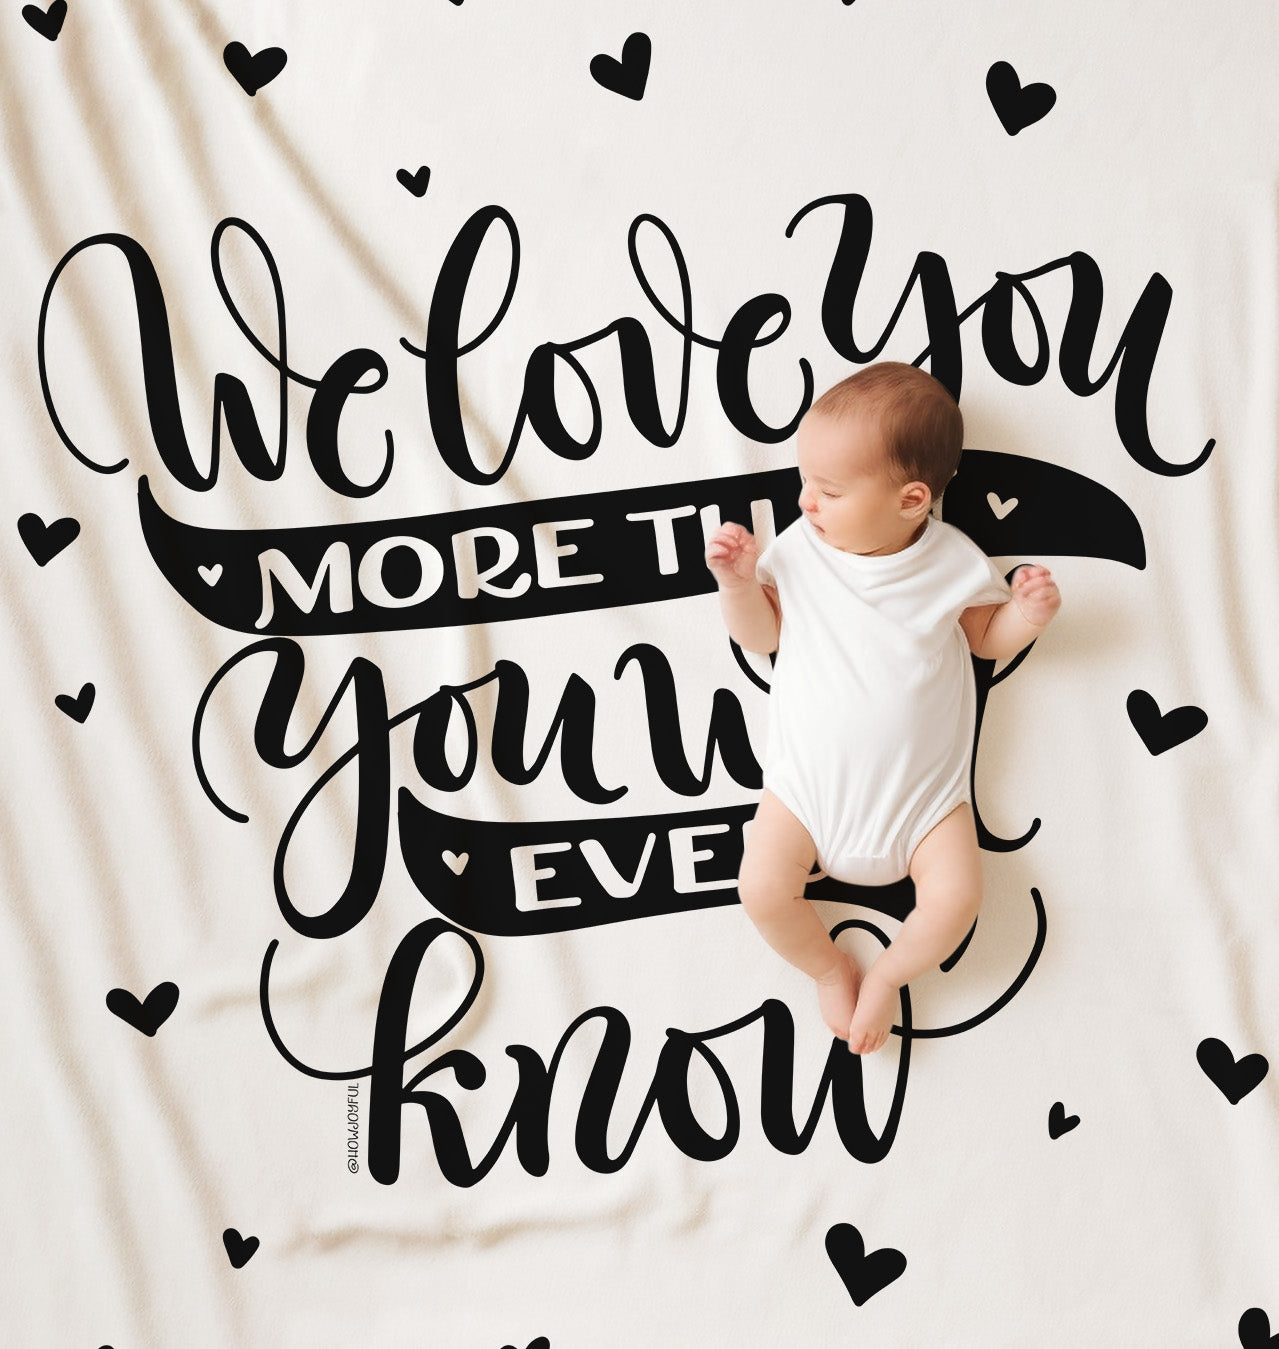 We love you more than you will ever know - Velveteen Blanket - howjoyfulshop